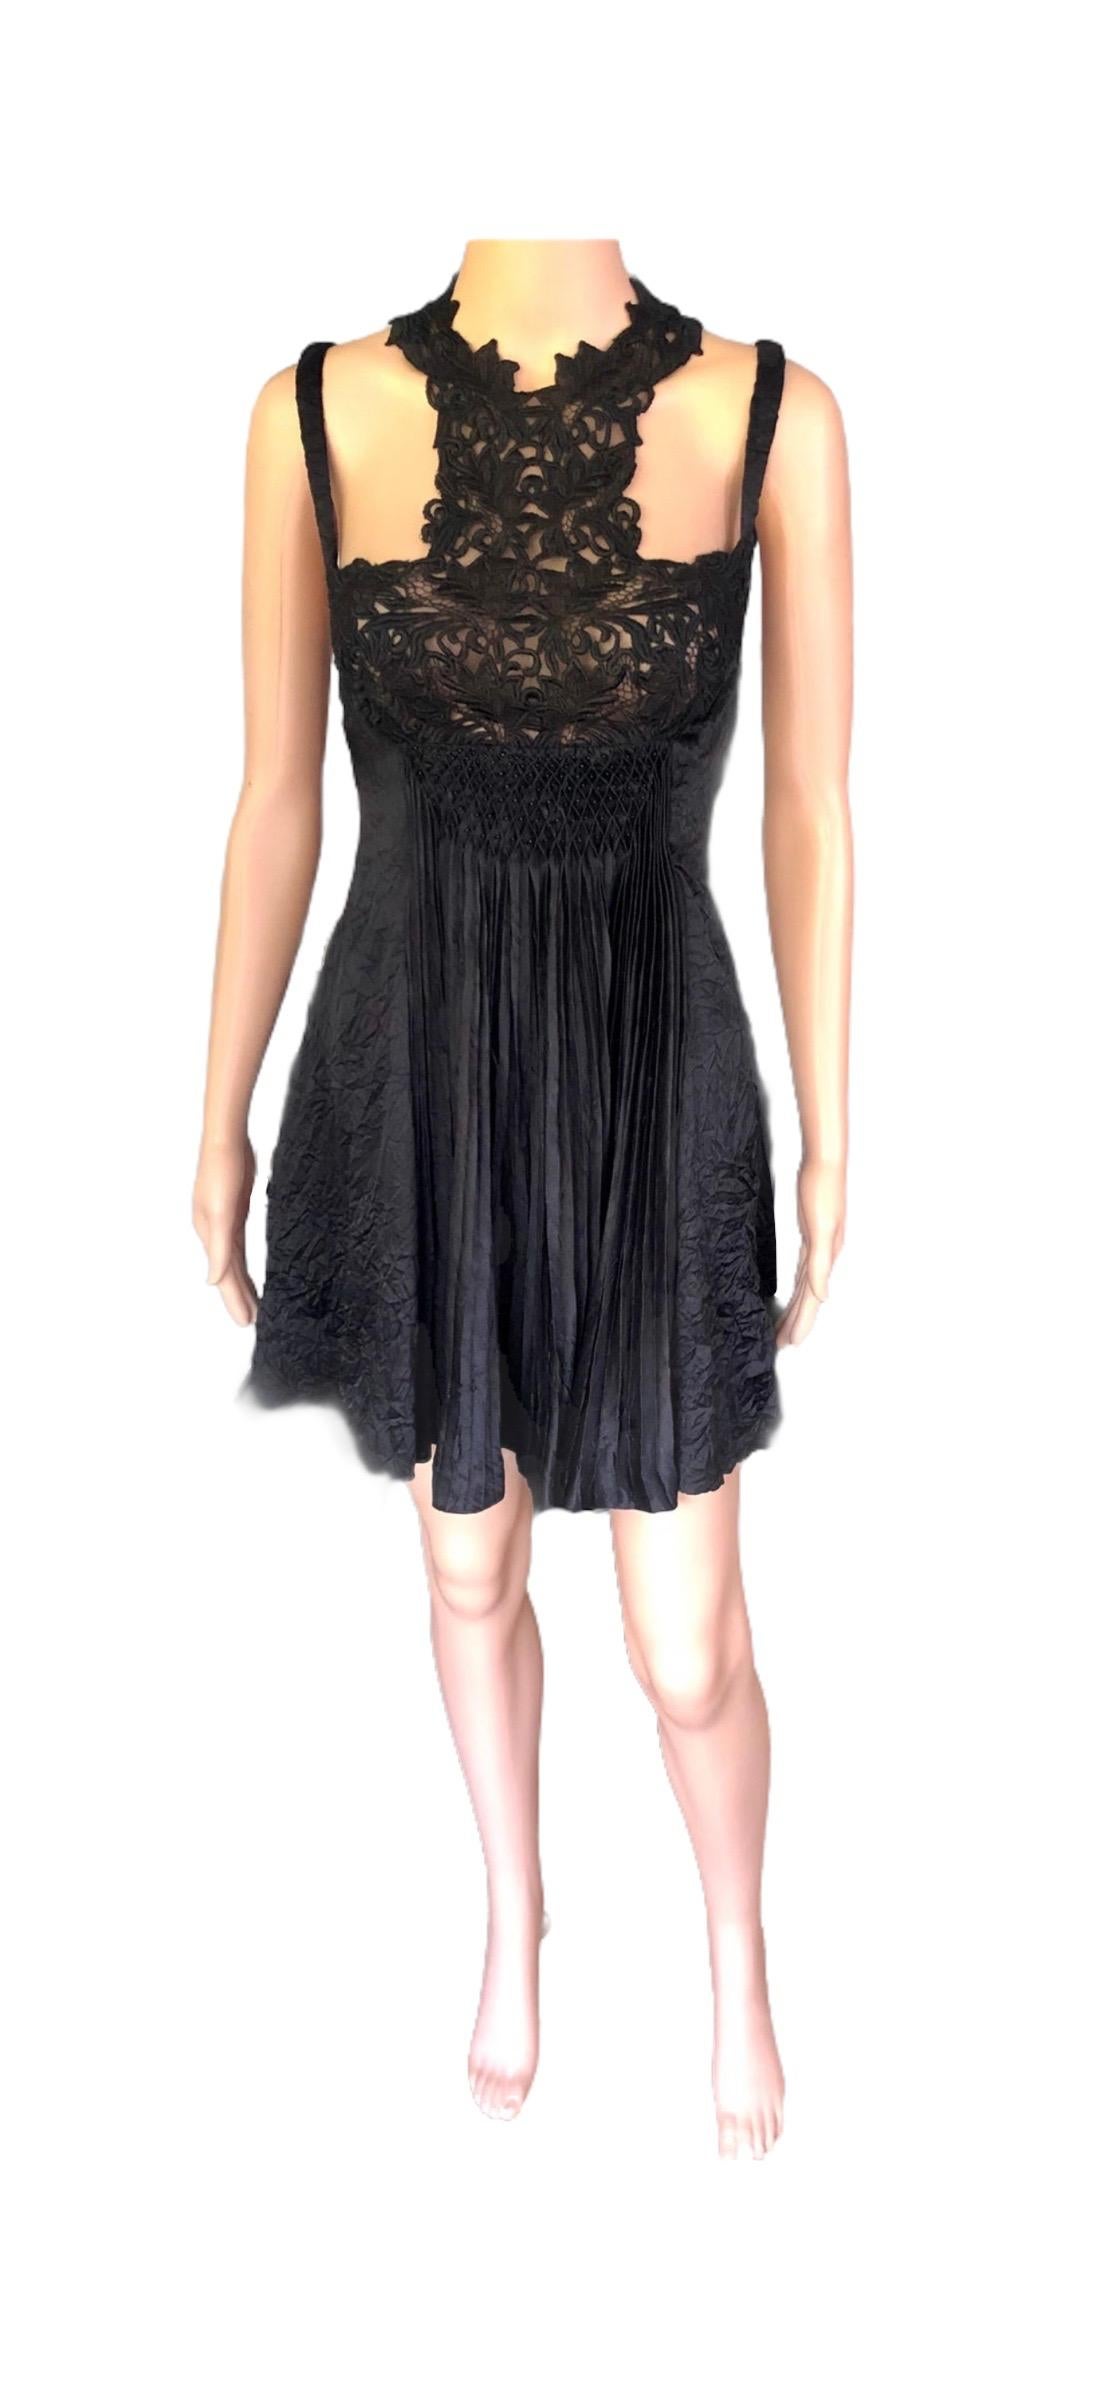 Gianni Versace S/S 1994 Runway Couture Vintage Crinkle Silk Lace Black Dress For Sale 5